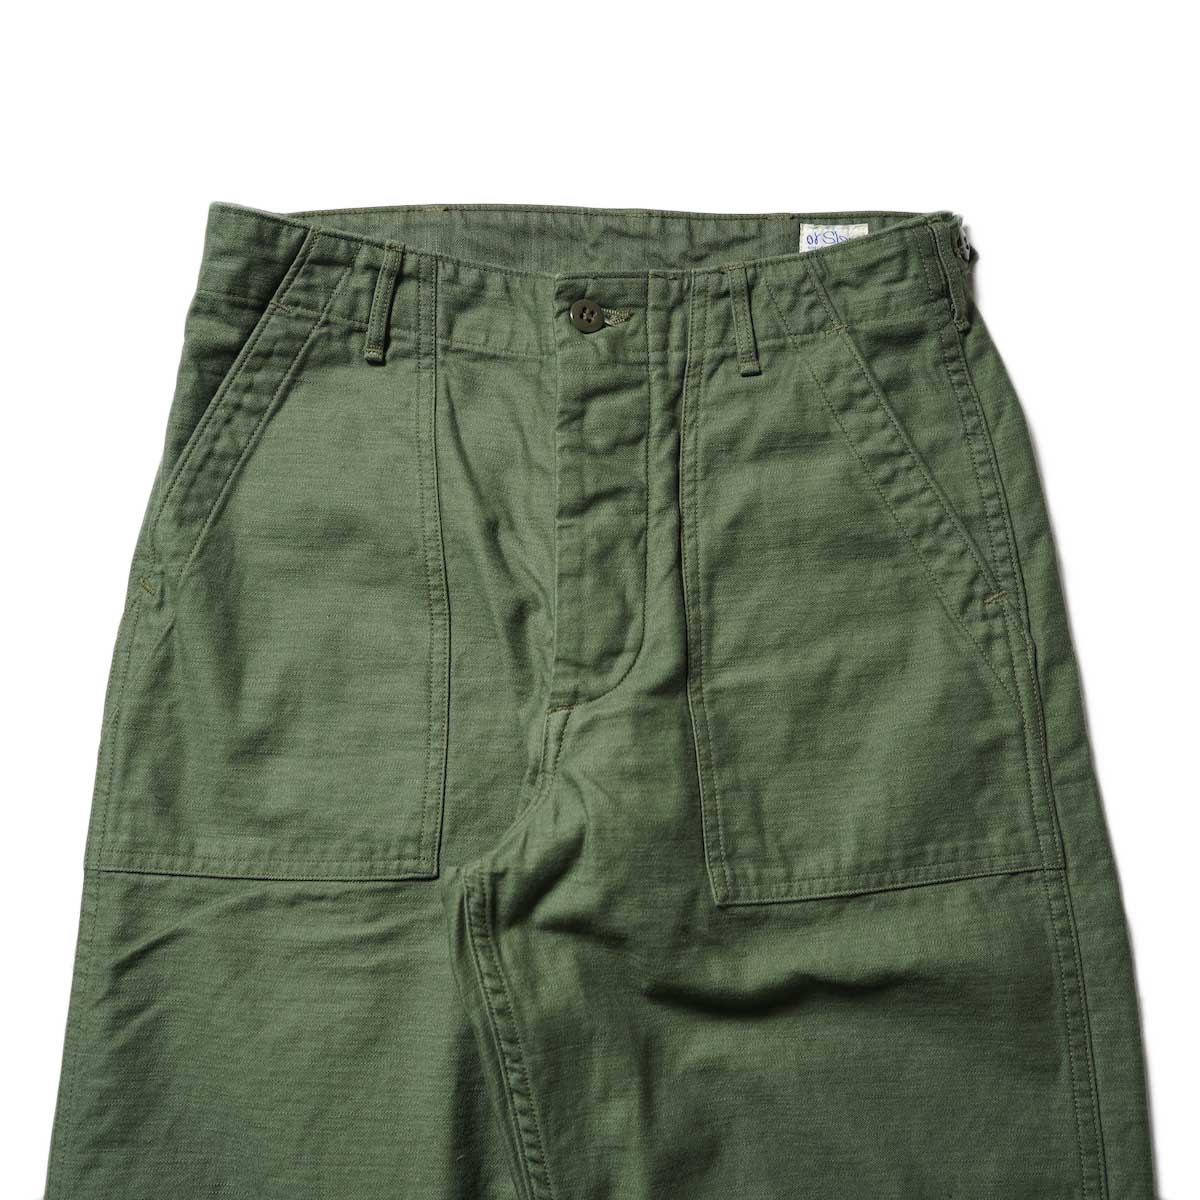 orSlow / US ARMY FATIGUE PANTS (GREEN) ウエスト